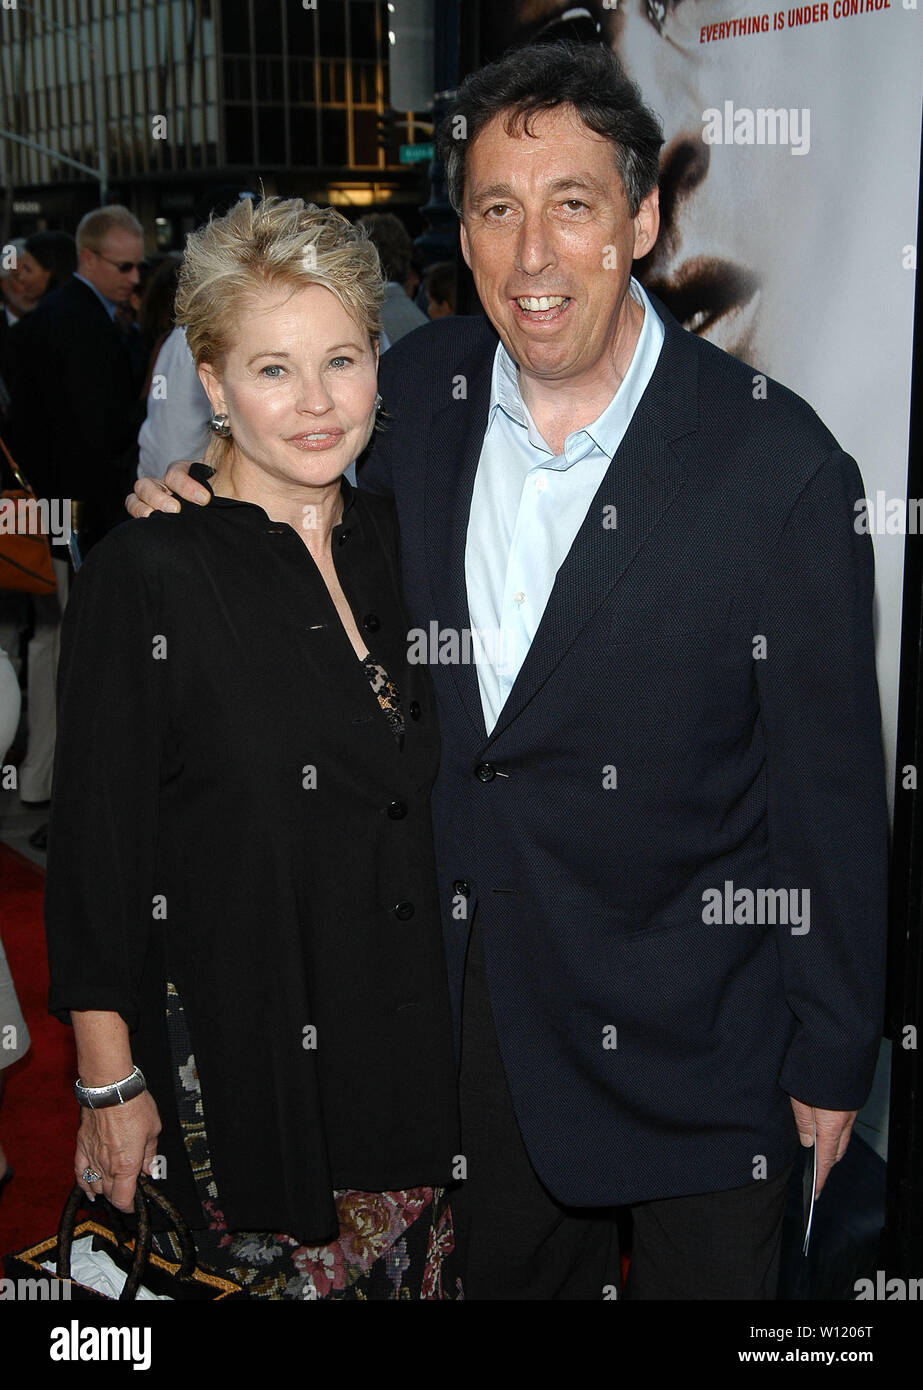 Ivan Reitman & Wife at the Los Angeles Premiere of 